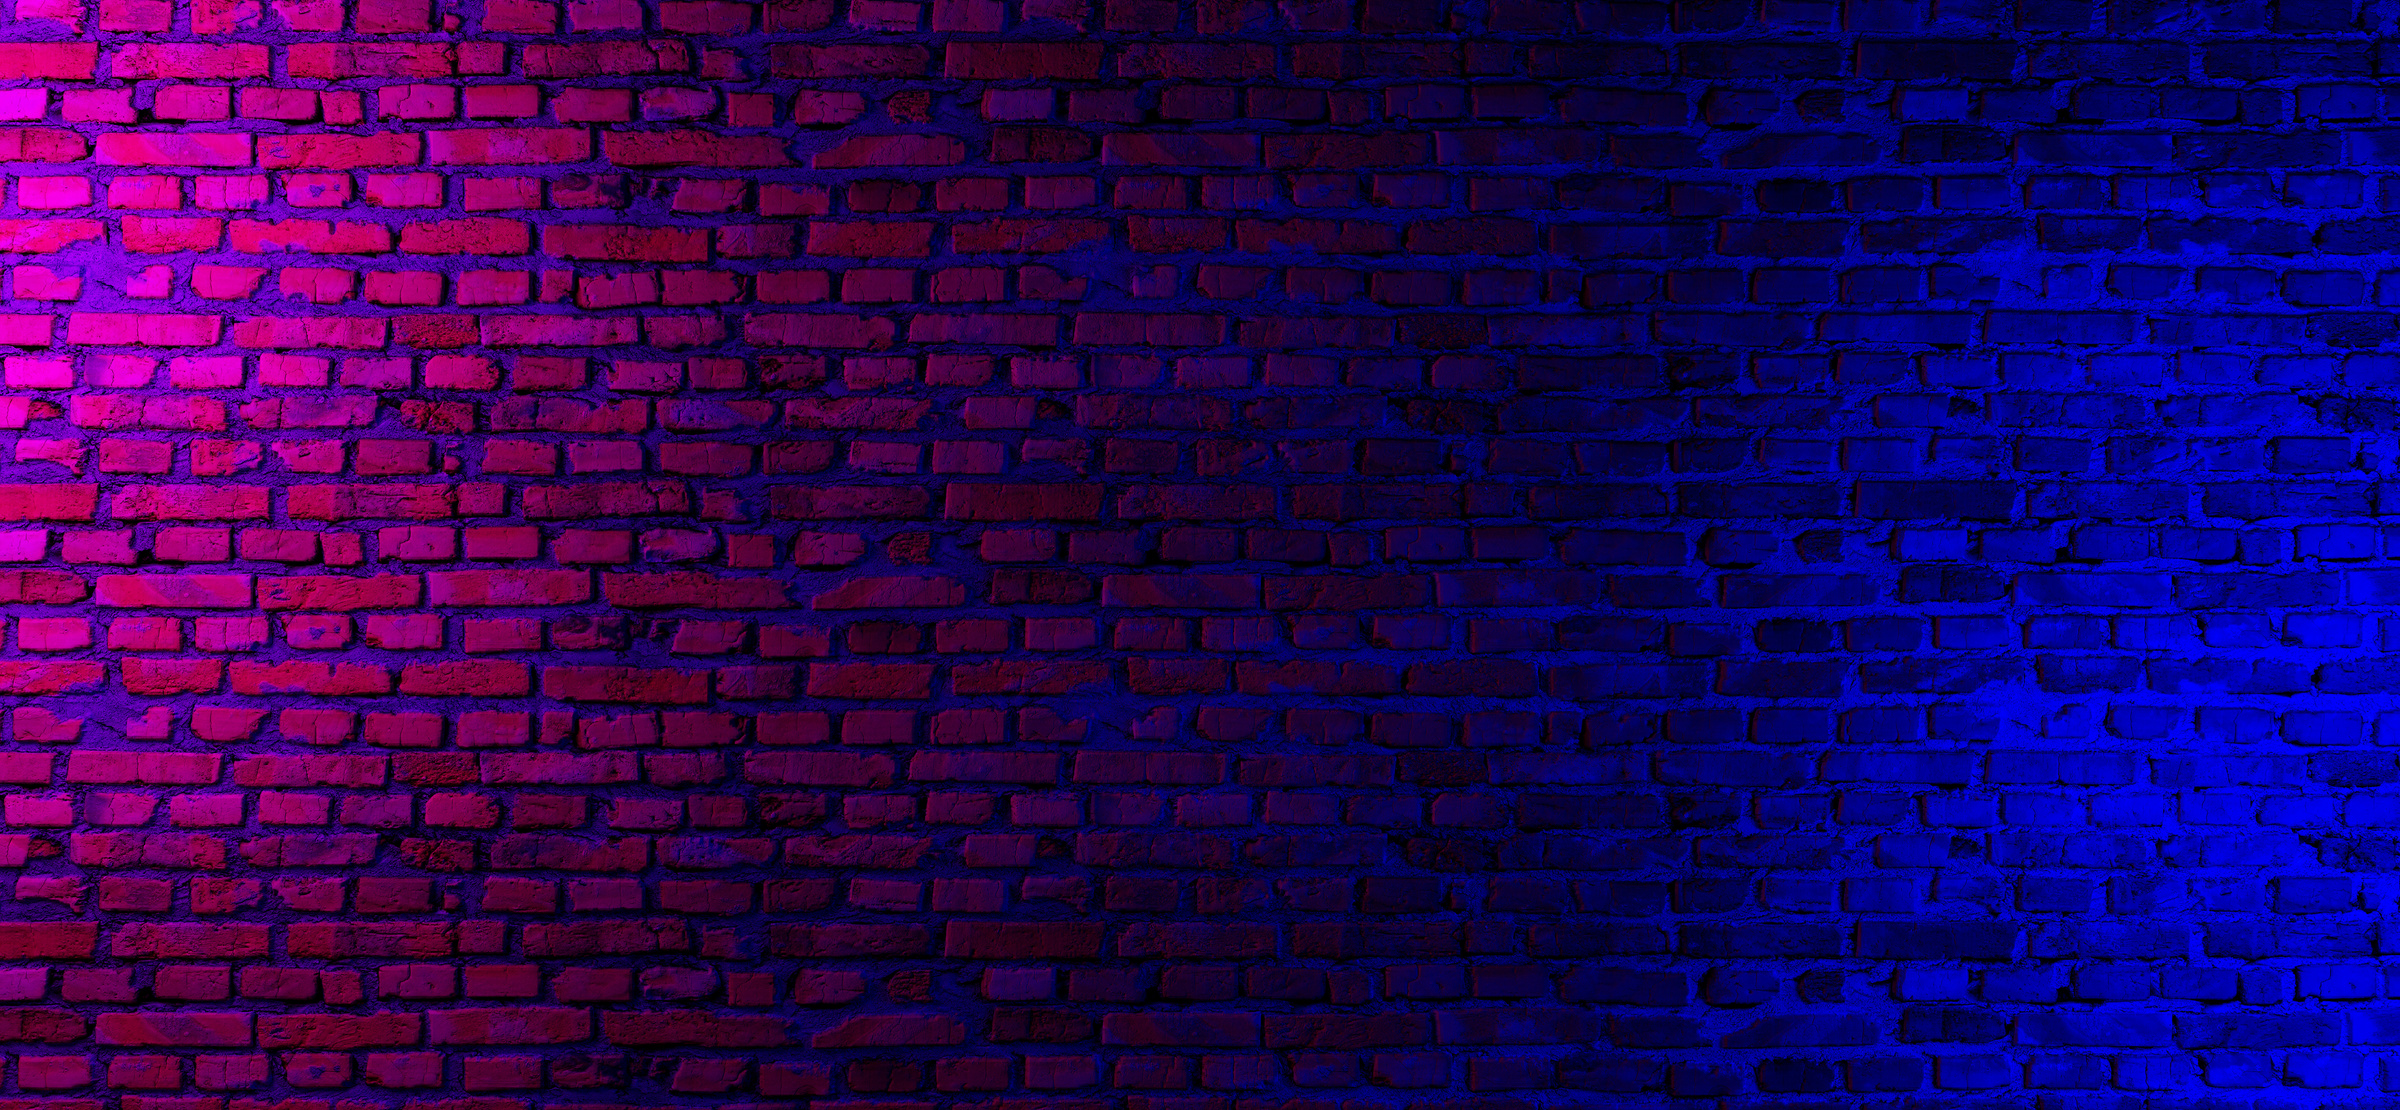 Brick Wall with Neon Lights